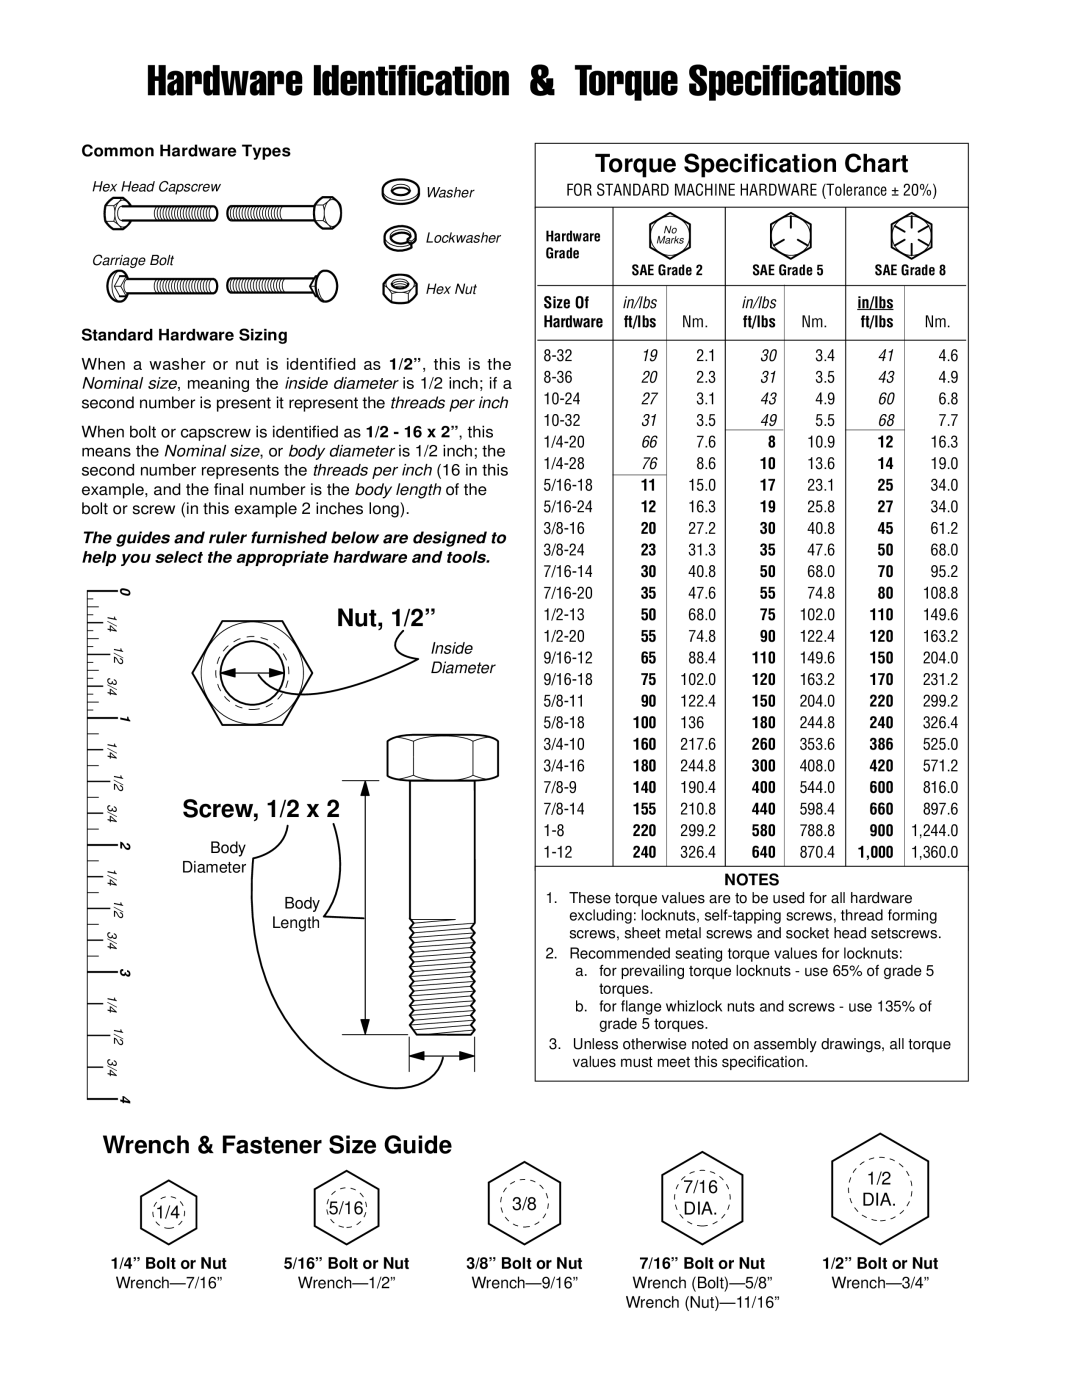 Simplicity TP 400-2397-00-AT-SMA Common Hardware Types, Standard Hardware Sizing, 1/4” Bolt or Nut, 5/16” Bolt or Nut 